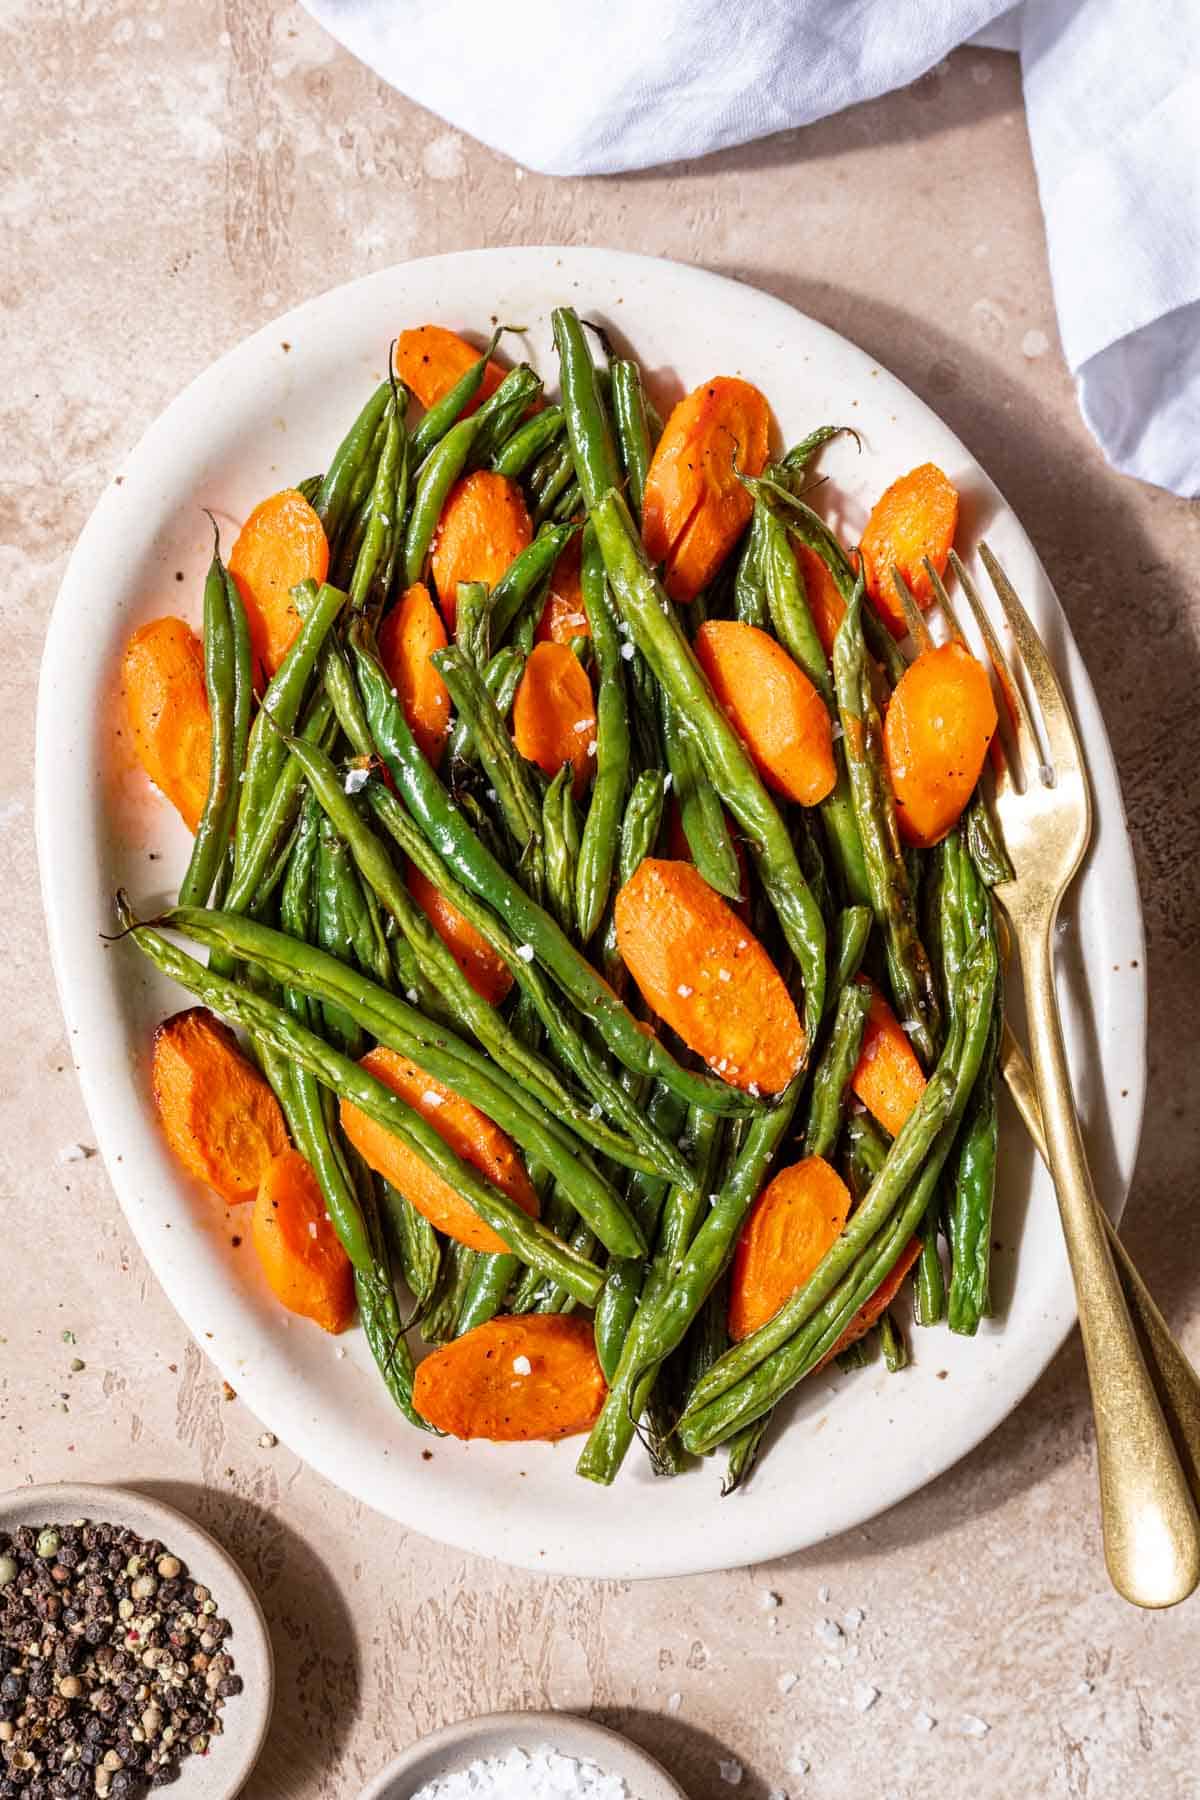 Roasted green beans and carrots on a serving platter.